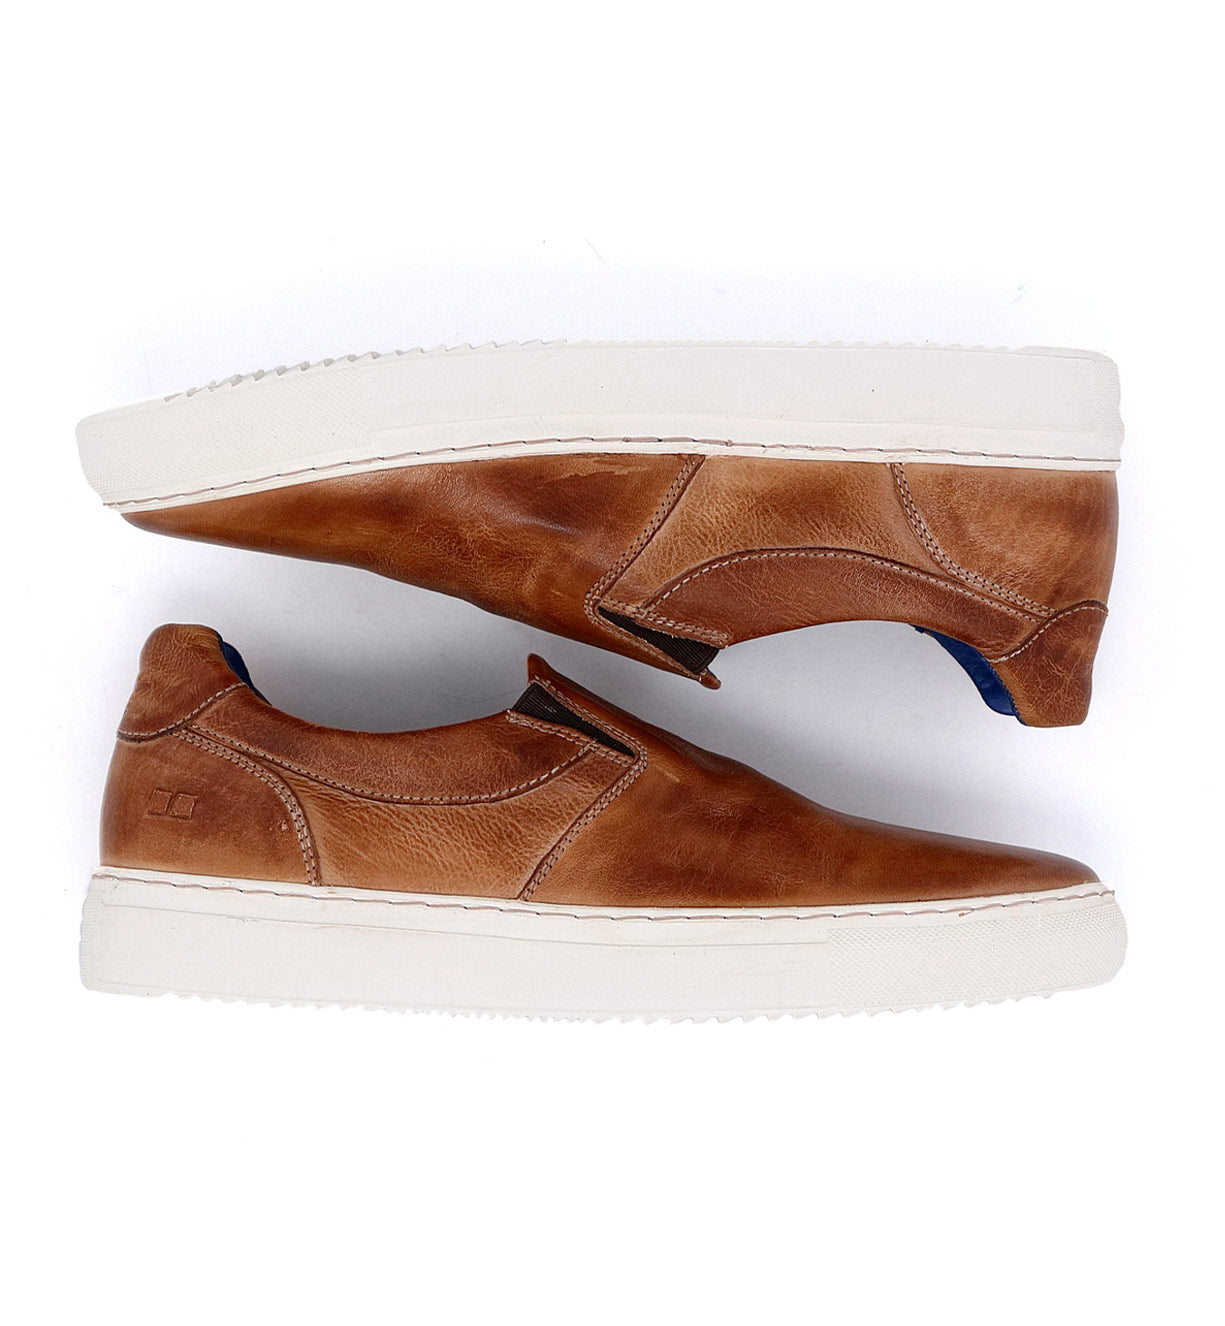 A pair of brown Harry slip on sneakers on a white background.